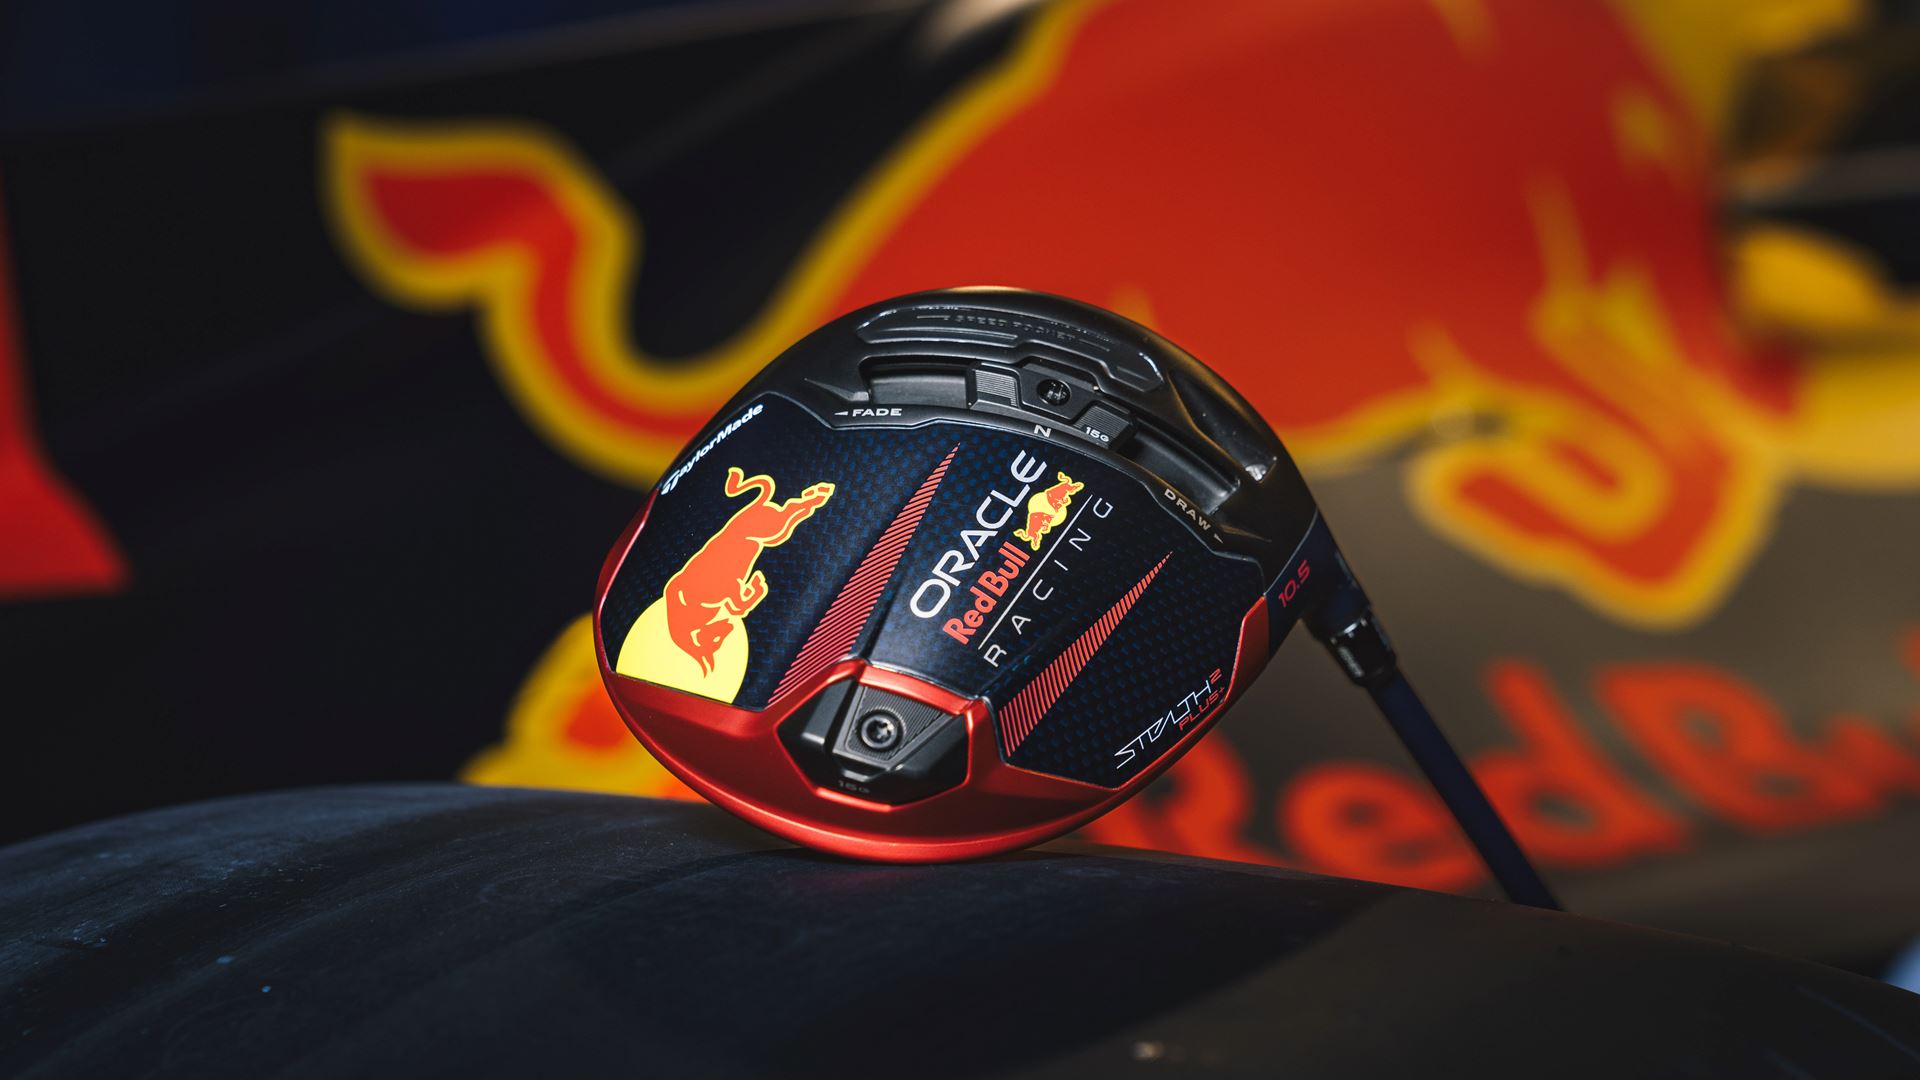 TaylorMade Golf Releases Products and Pricing For Limited